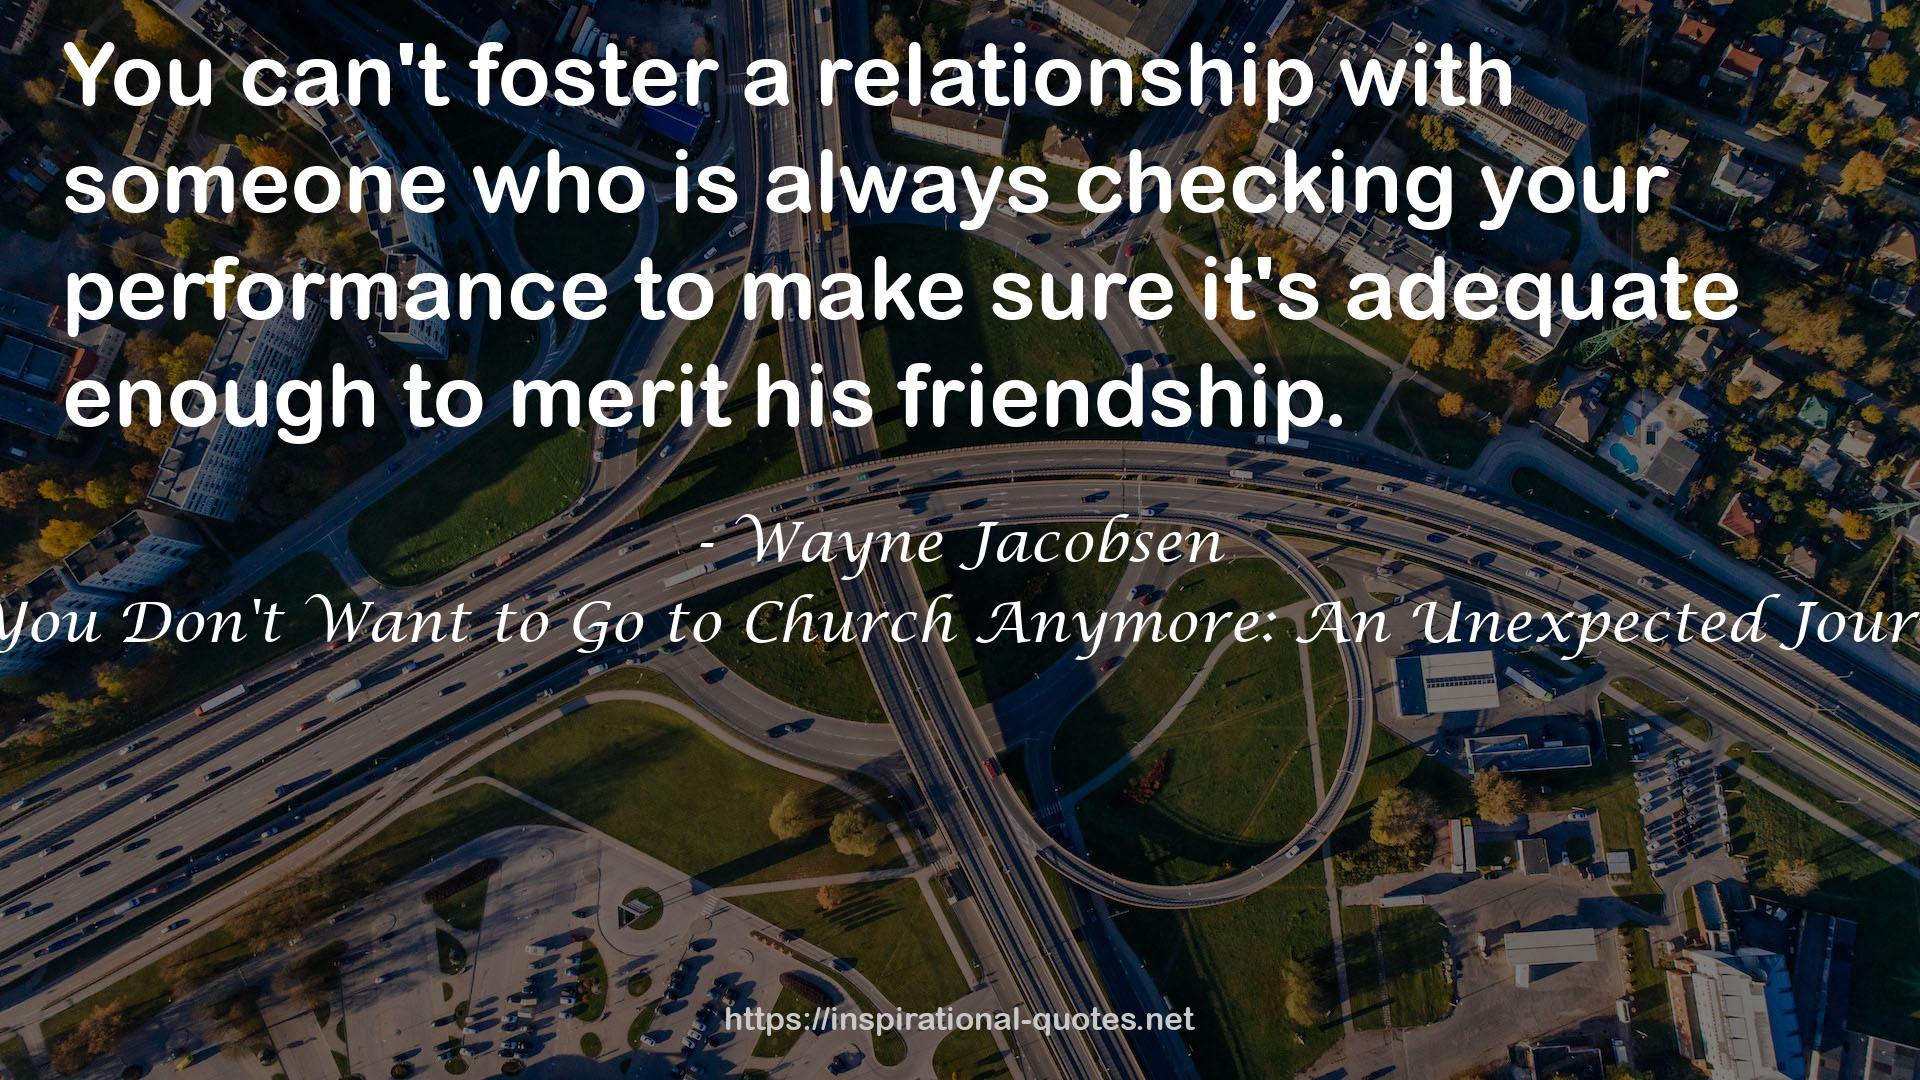 So You Don't Want to Go to Church Anymore: An Unexpected Journey QUOTES